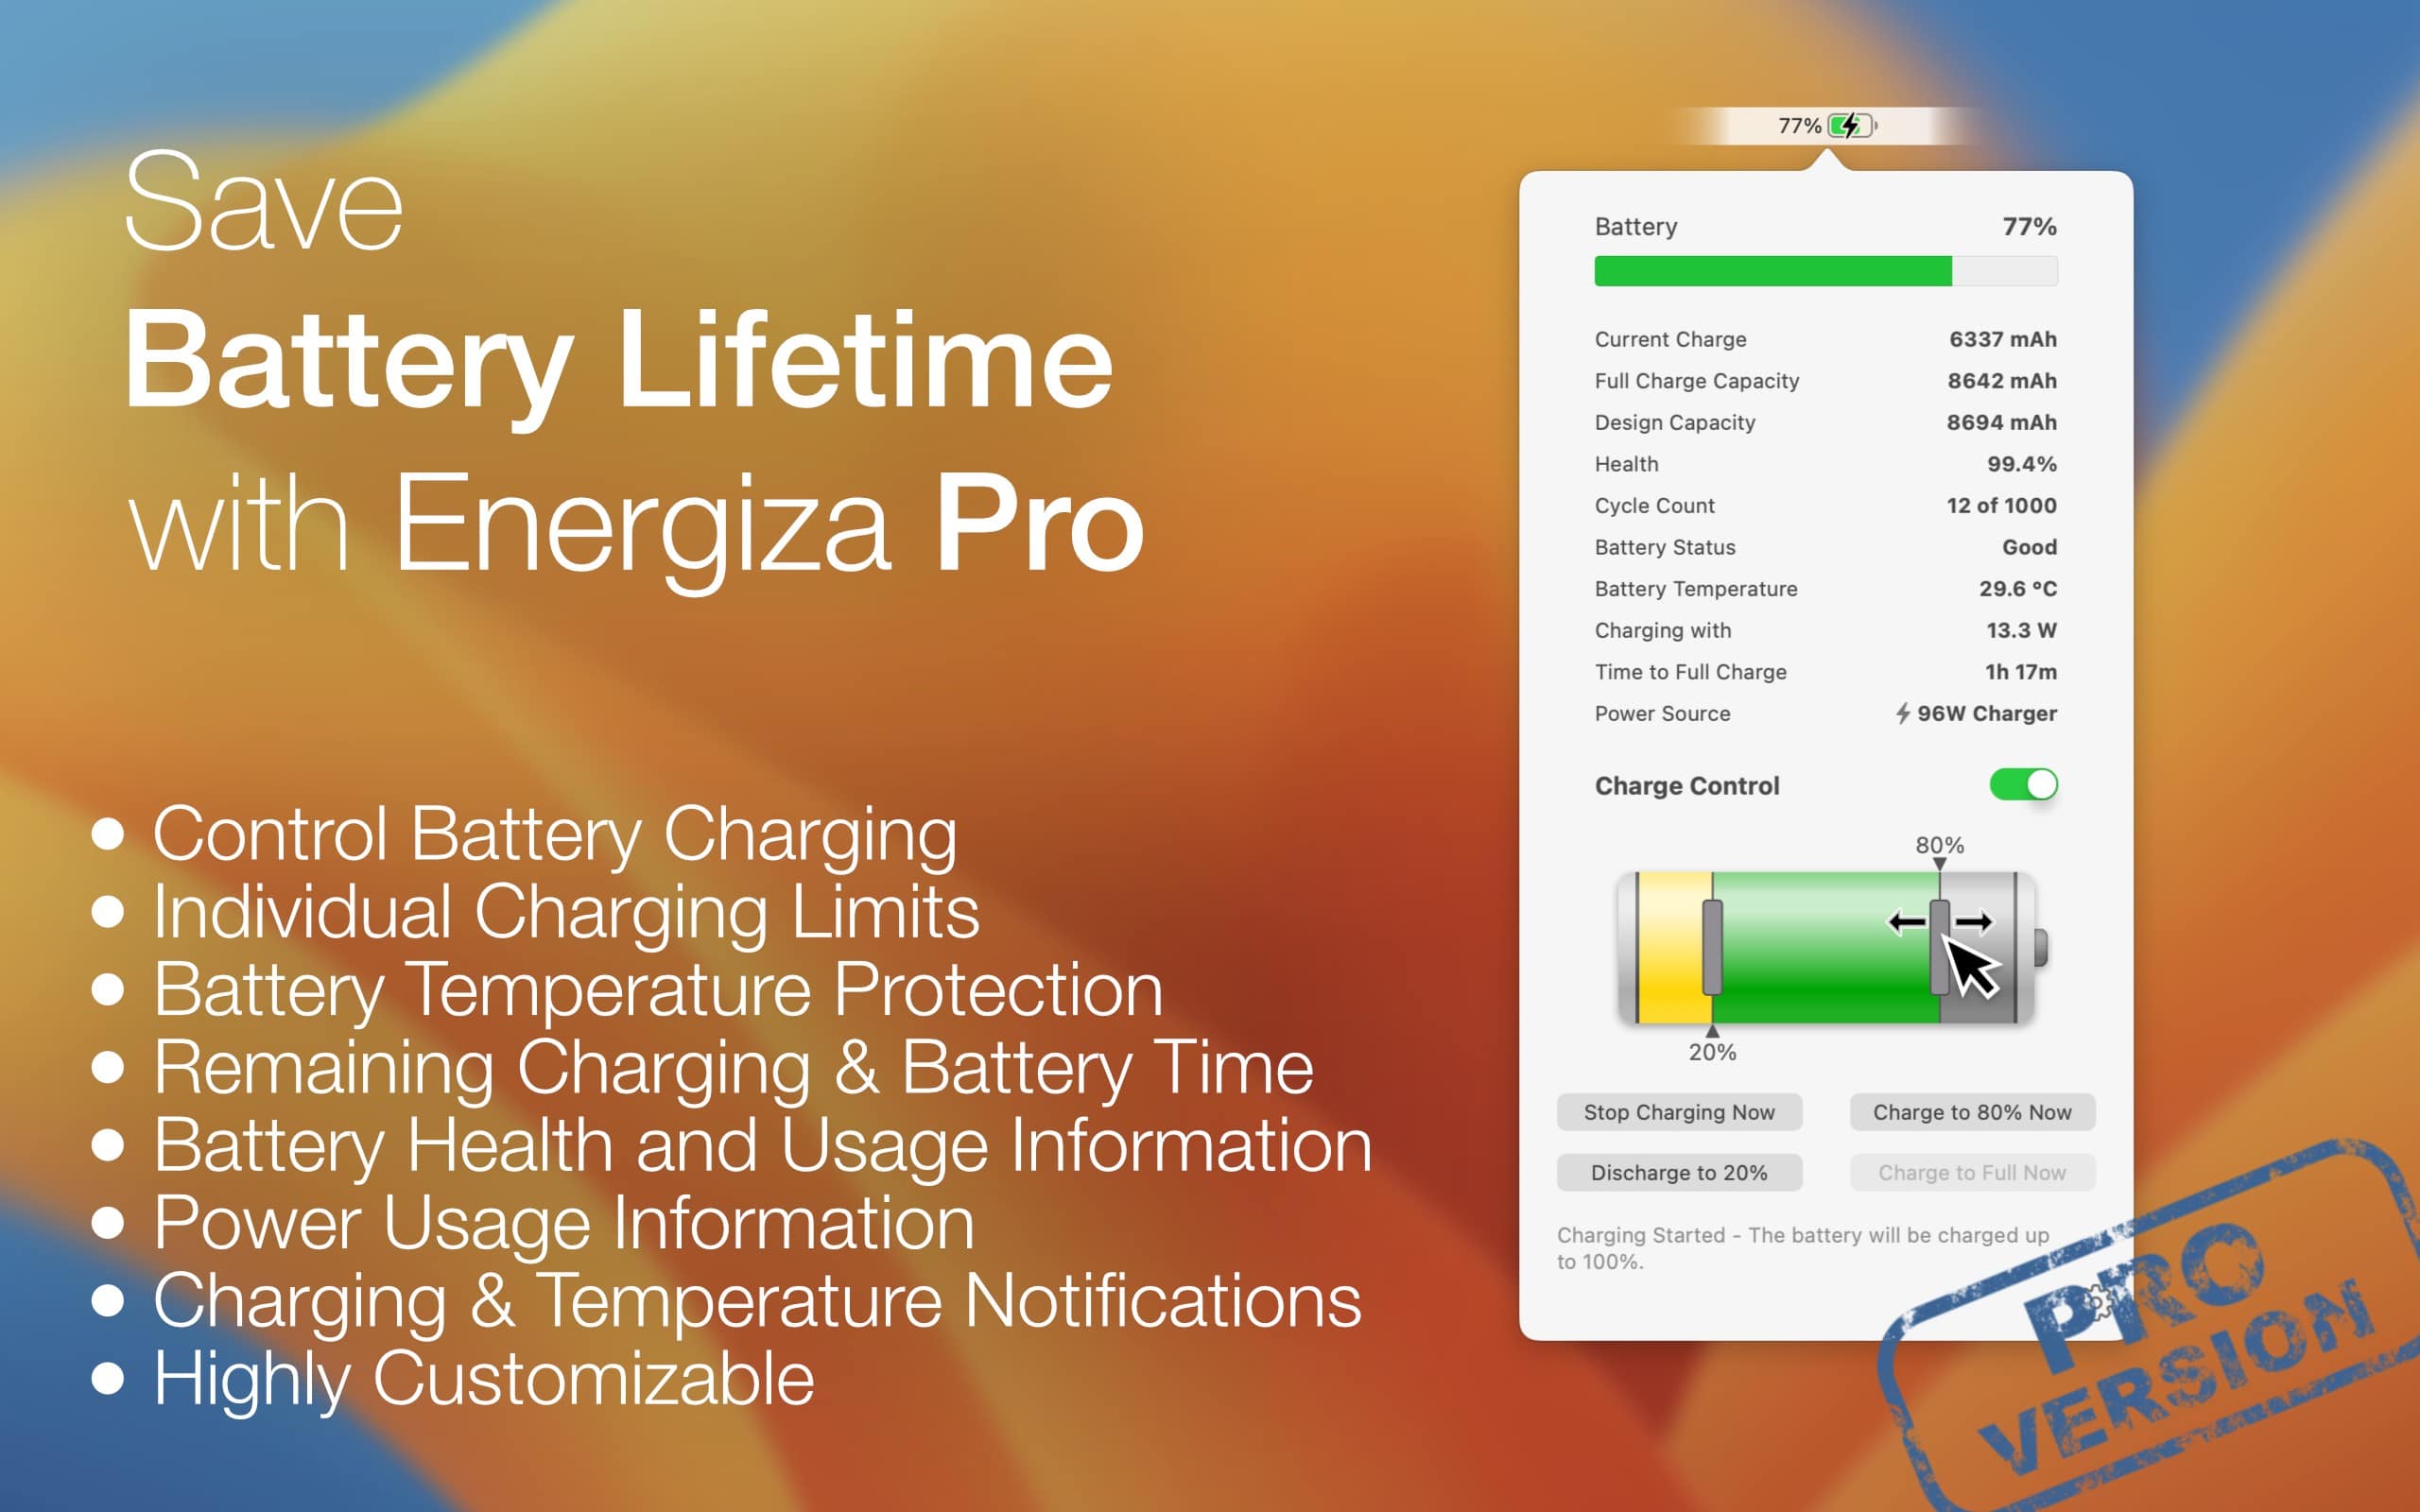 Save Battery Lifetime with Energiza Pro. • Control Battery Charging • Individual Charging Limits • Battery Temperature Protection • Remaining Charging & Battery Time • Battery Health and Usage Information • Power Usage Information • Charging & Temperature Notifications • Highly Customizable